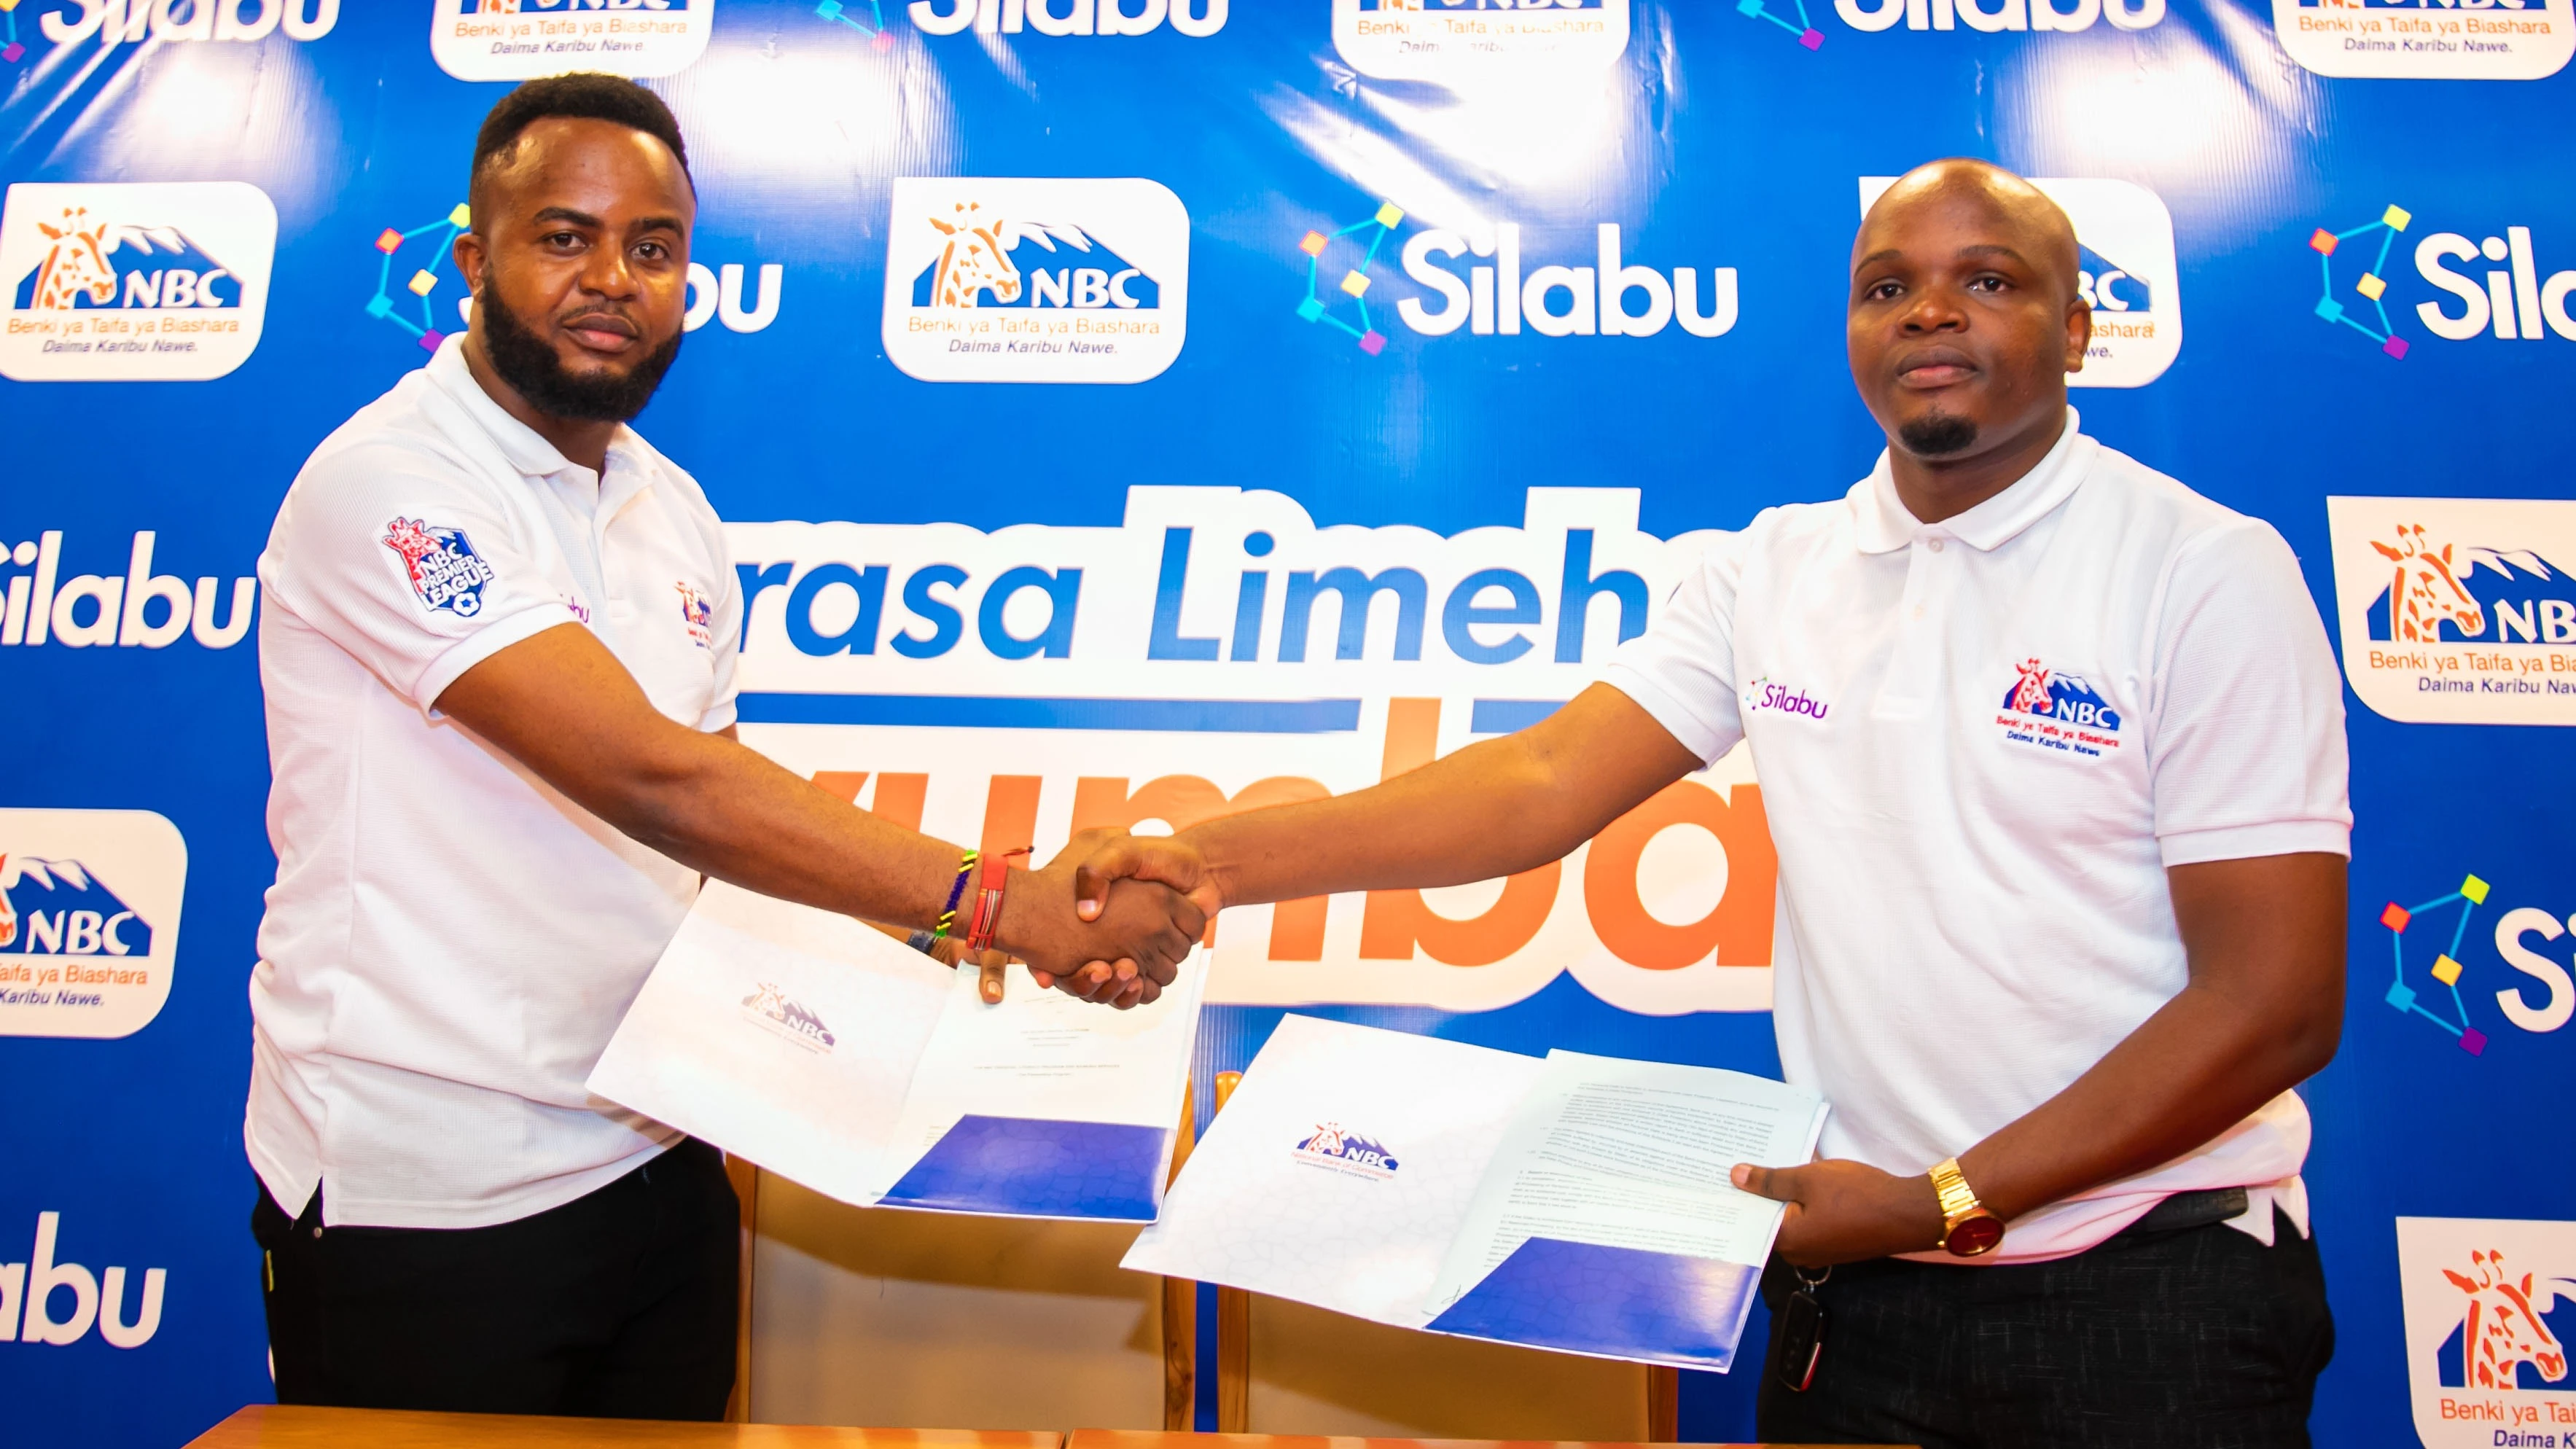 NBC's Education Services Manager, Yoabu Ndanzi  (R), and Adam Duma, Co-founder of SILABU APP, a company that provides supplementary education  (tuition) services for pupils and students at home and through the internet, congratulate each other .